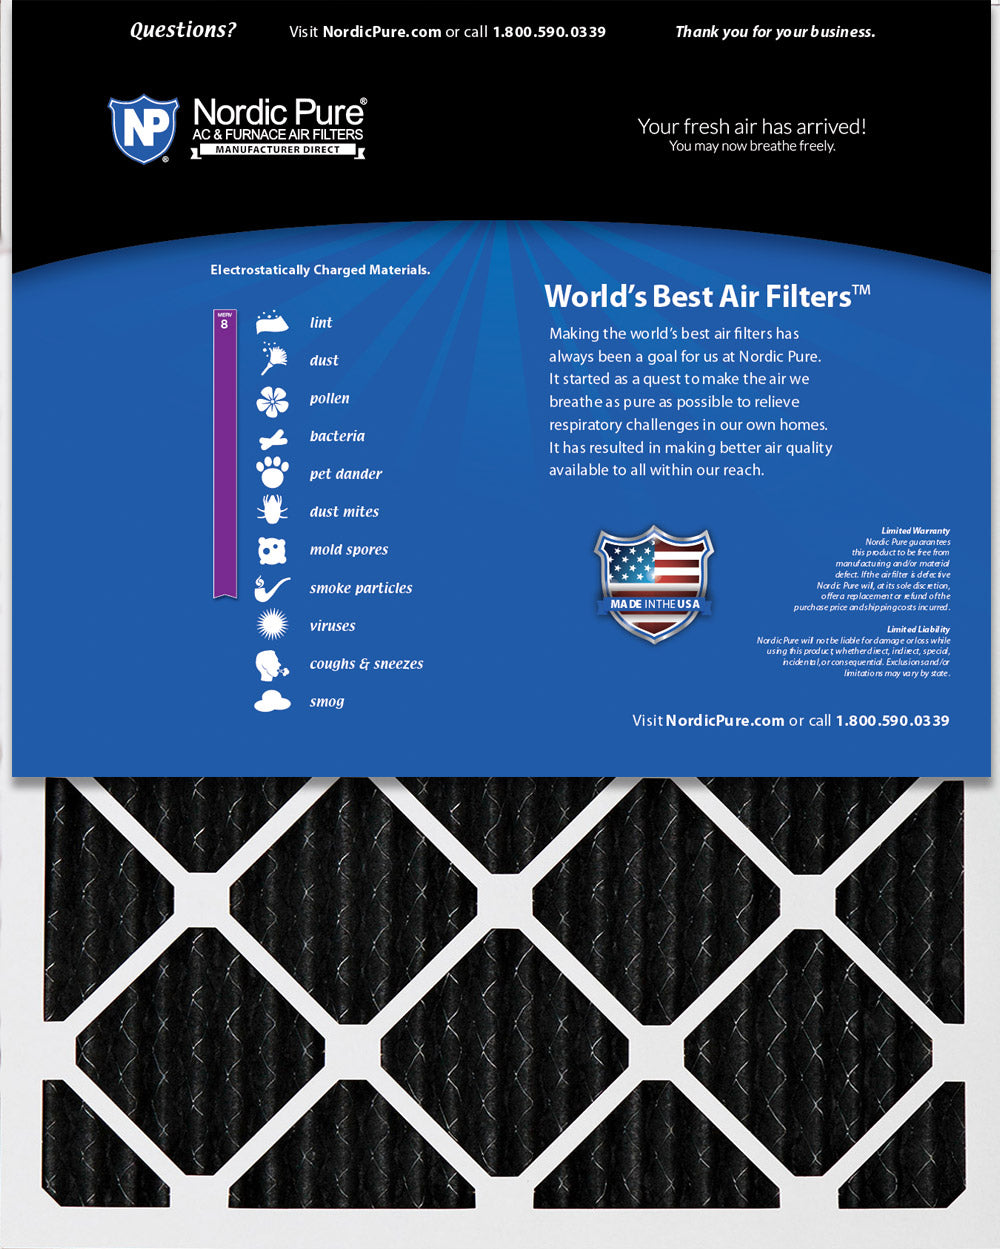 15x20x1 Pure Carbon Pleated Odor Reduction Furnace Air Filters